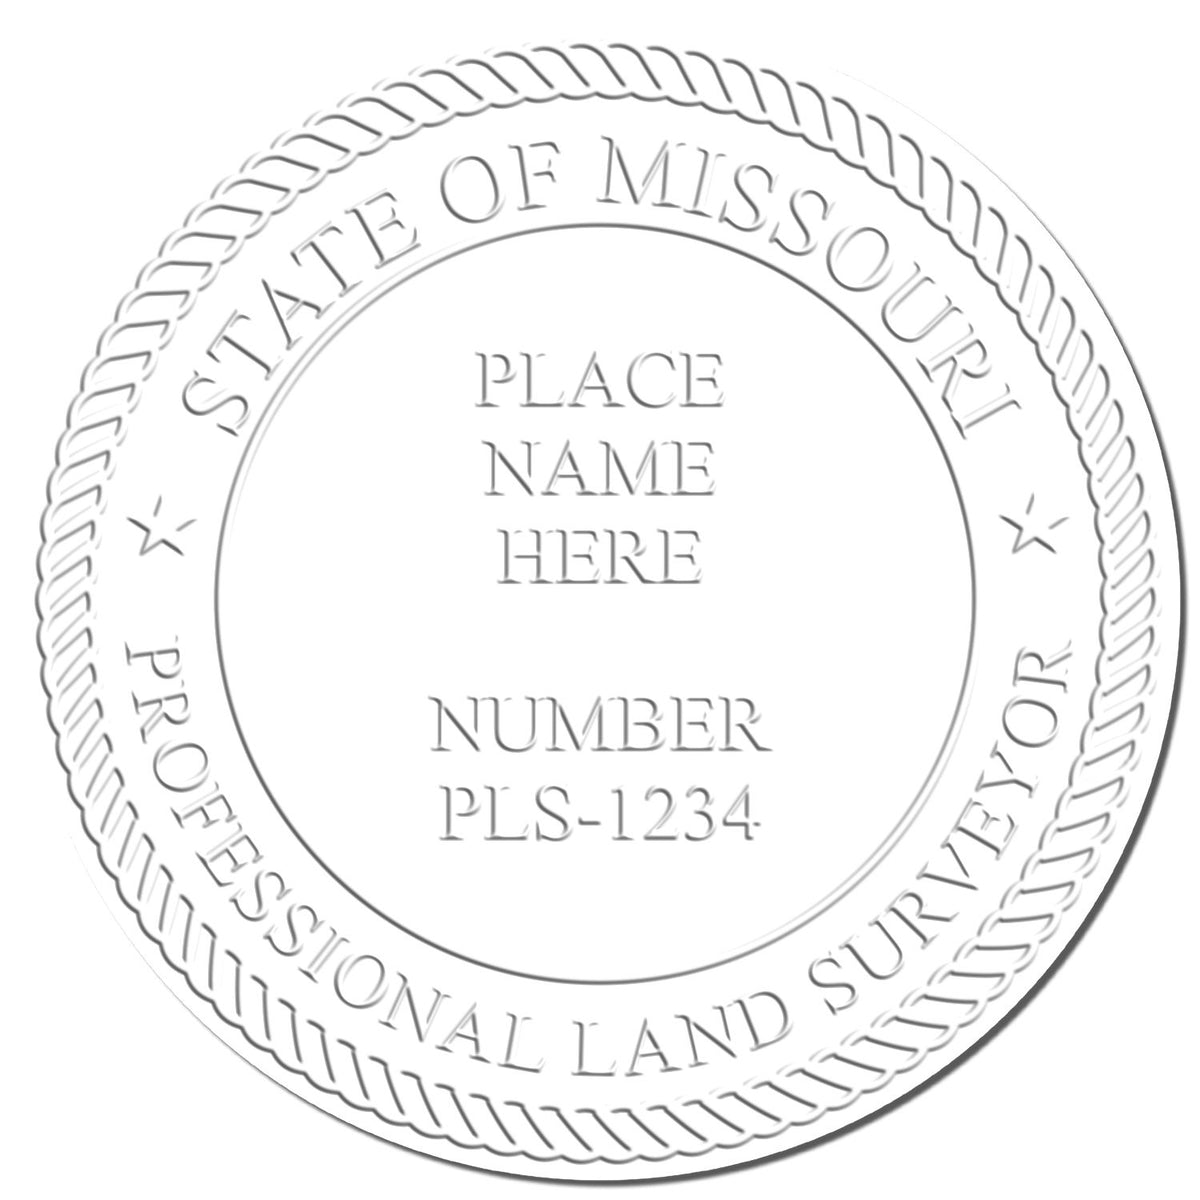 This paper is stamped with a sample imprint of the Gift Missouri Land Surveyor Seal, signifying its quality and reliability.